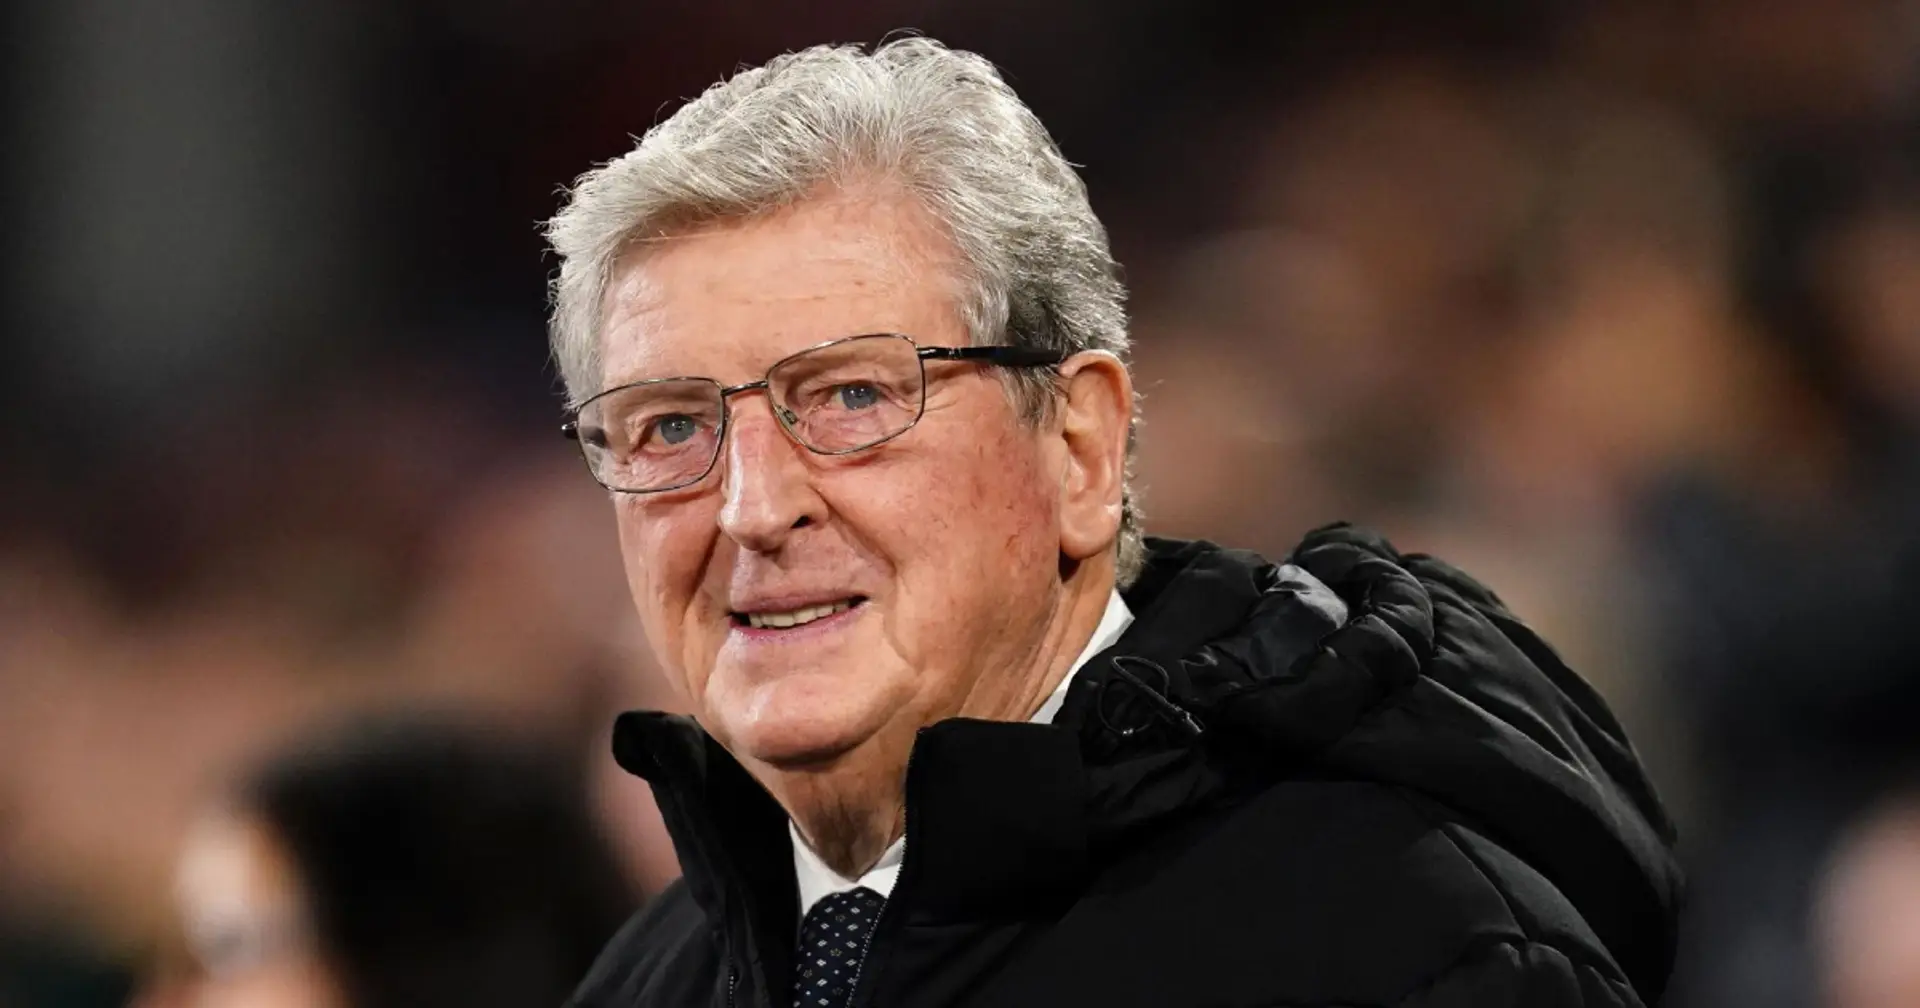 'Roy Hodgson was taken ill': Crystal Palace release statement as press conference is cancelled